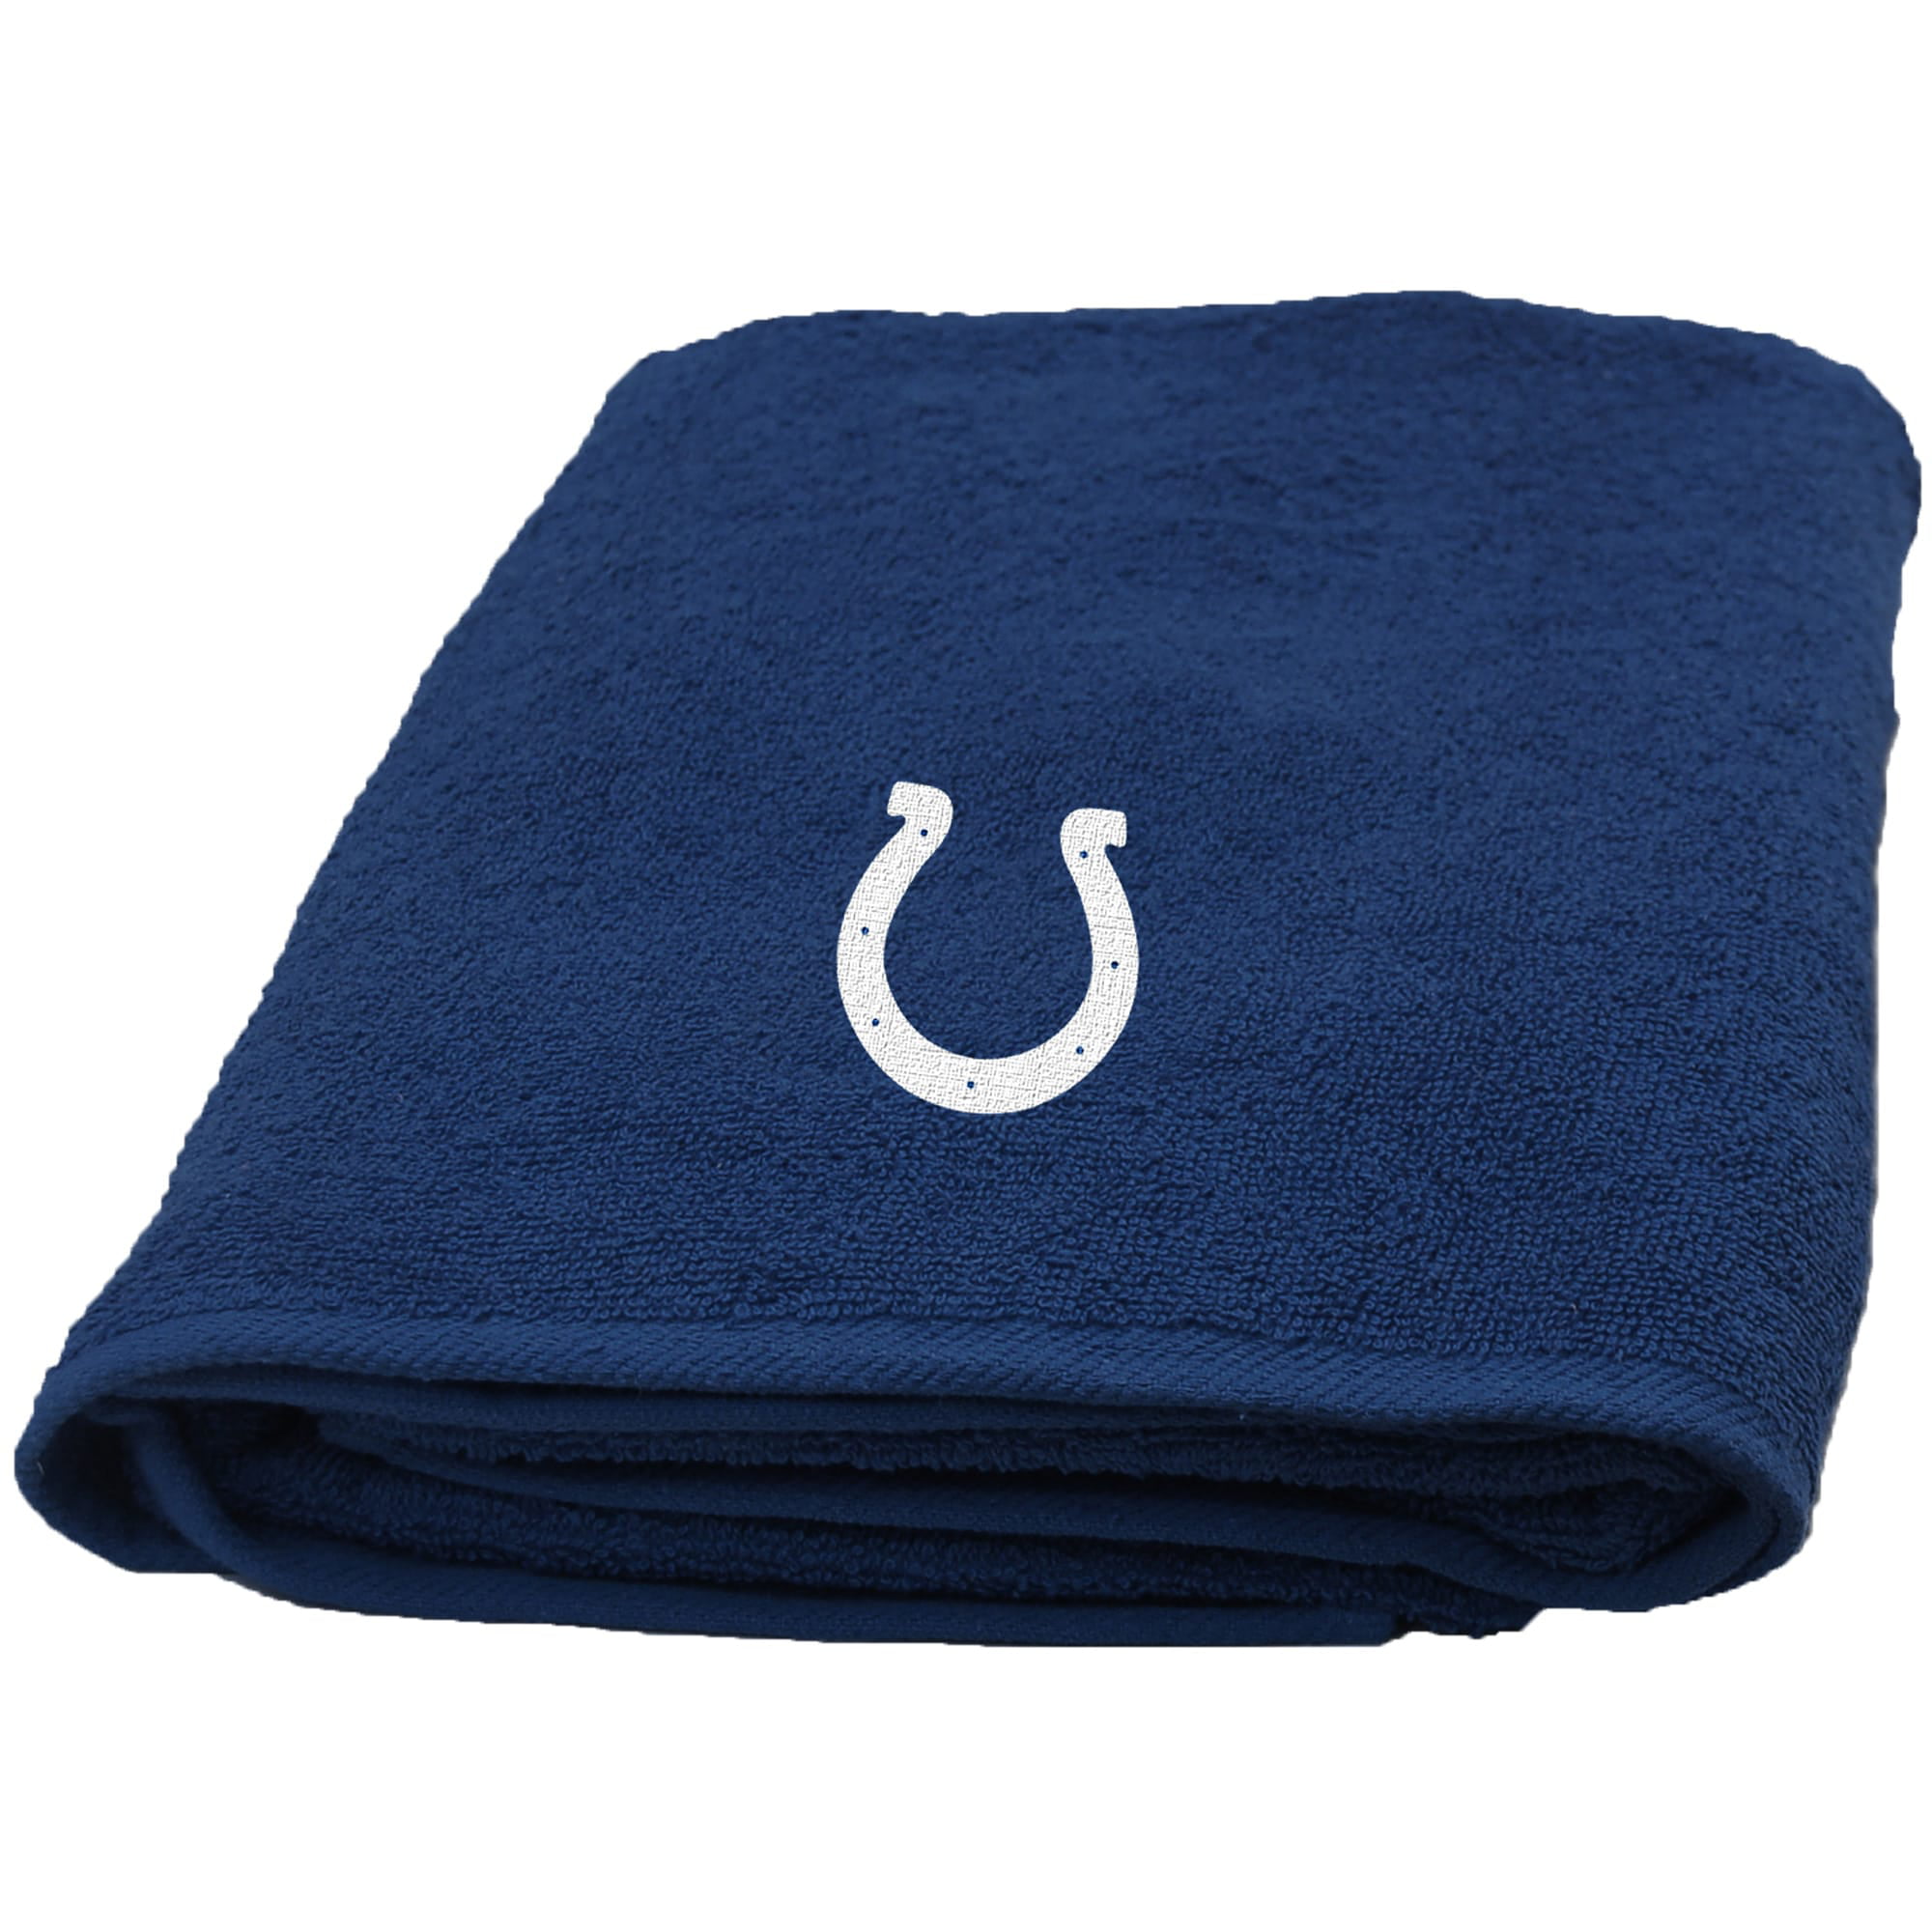 Nfl Indianapolis Colts 25 X 50 Bath, Indianapolis Colts Shower Curtain